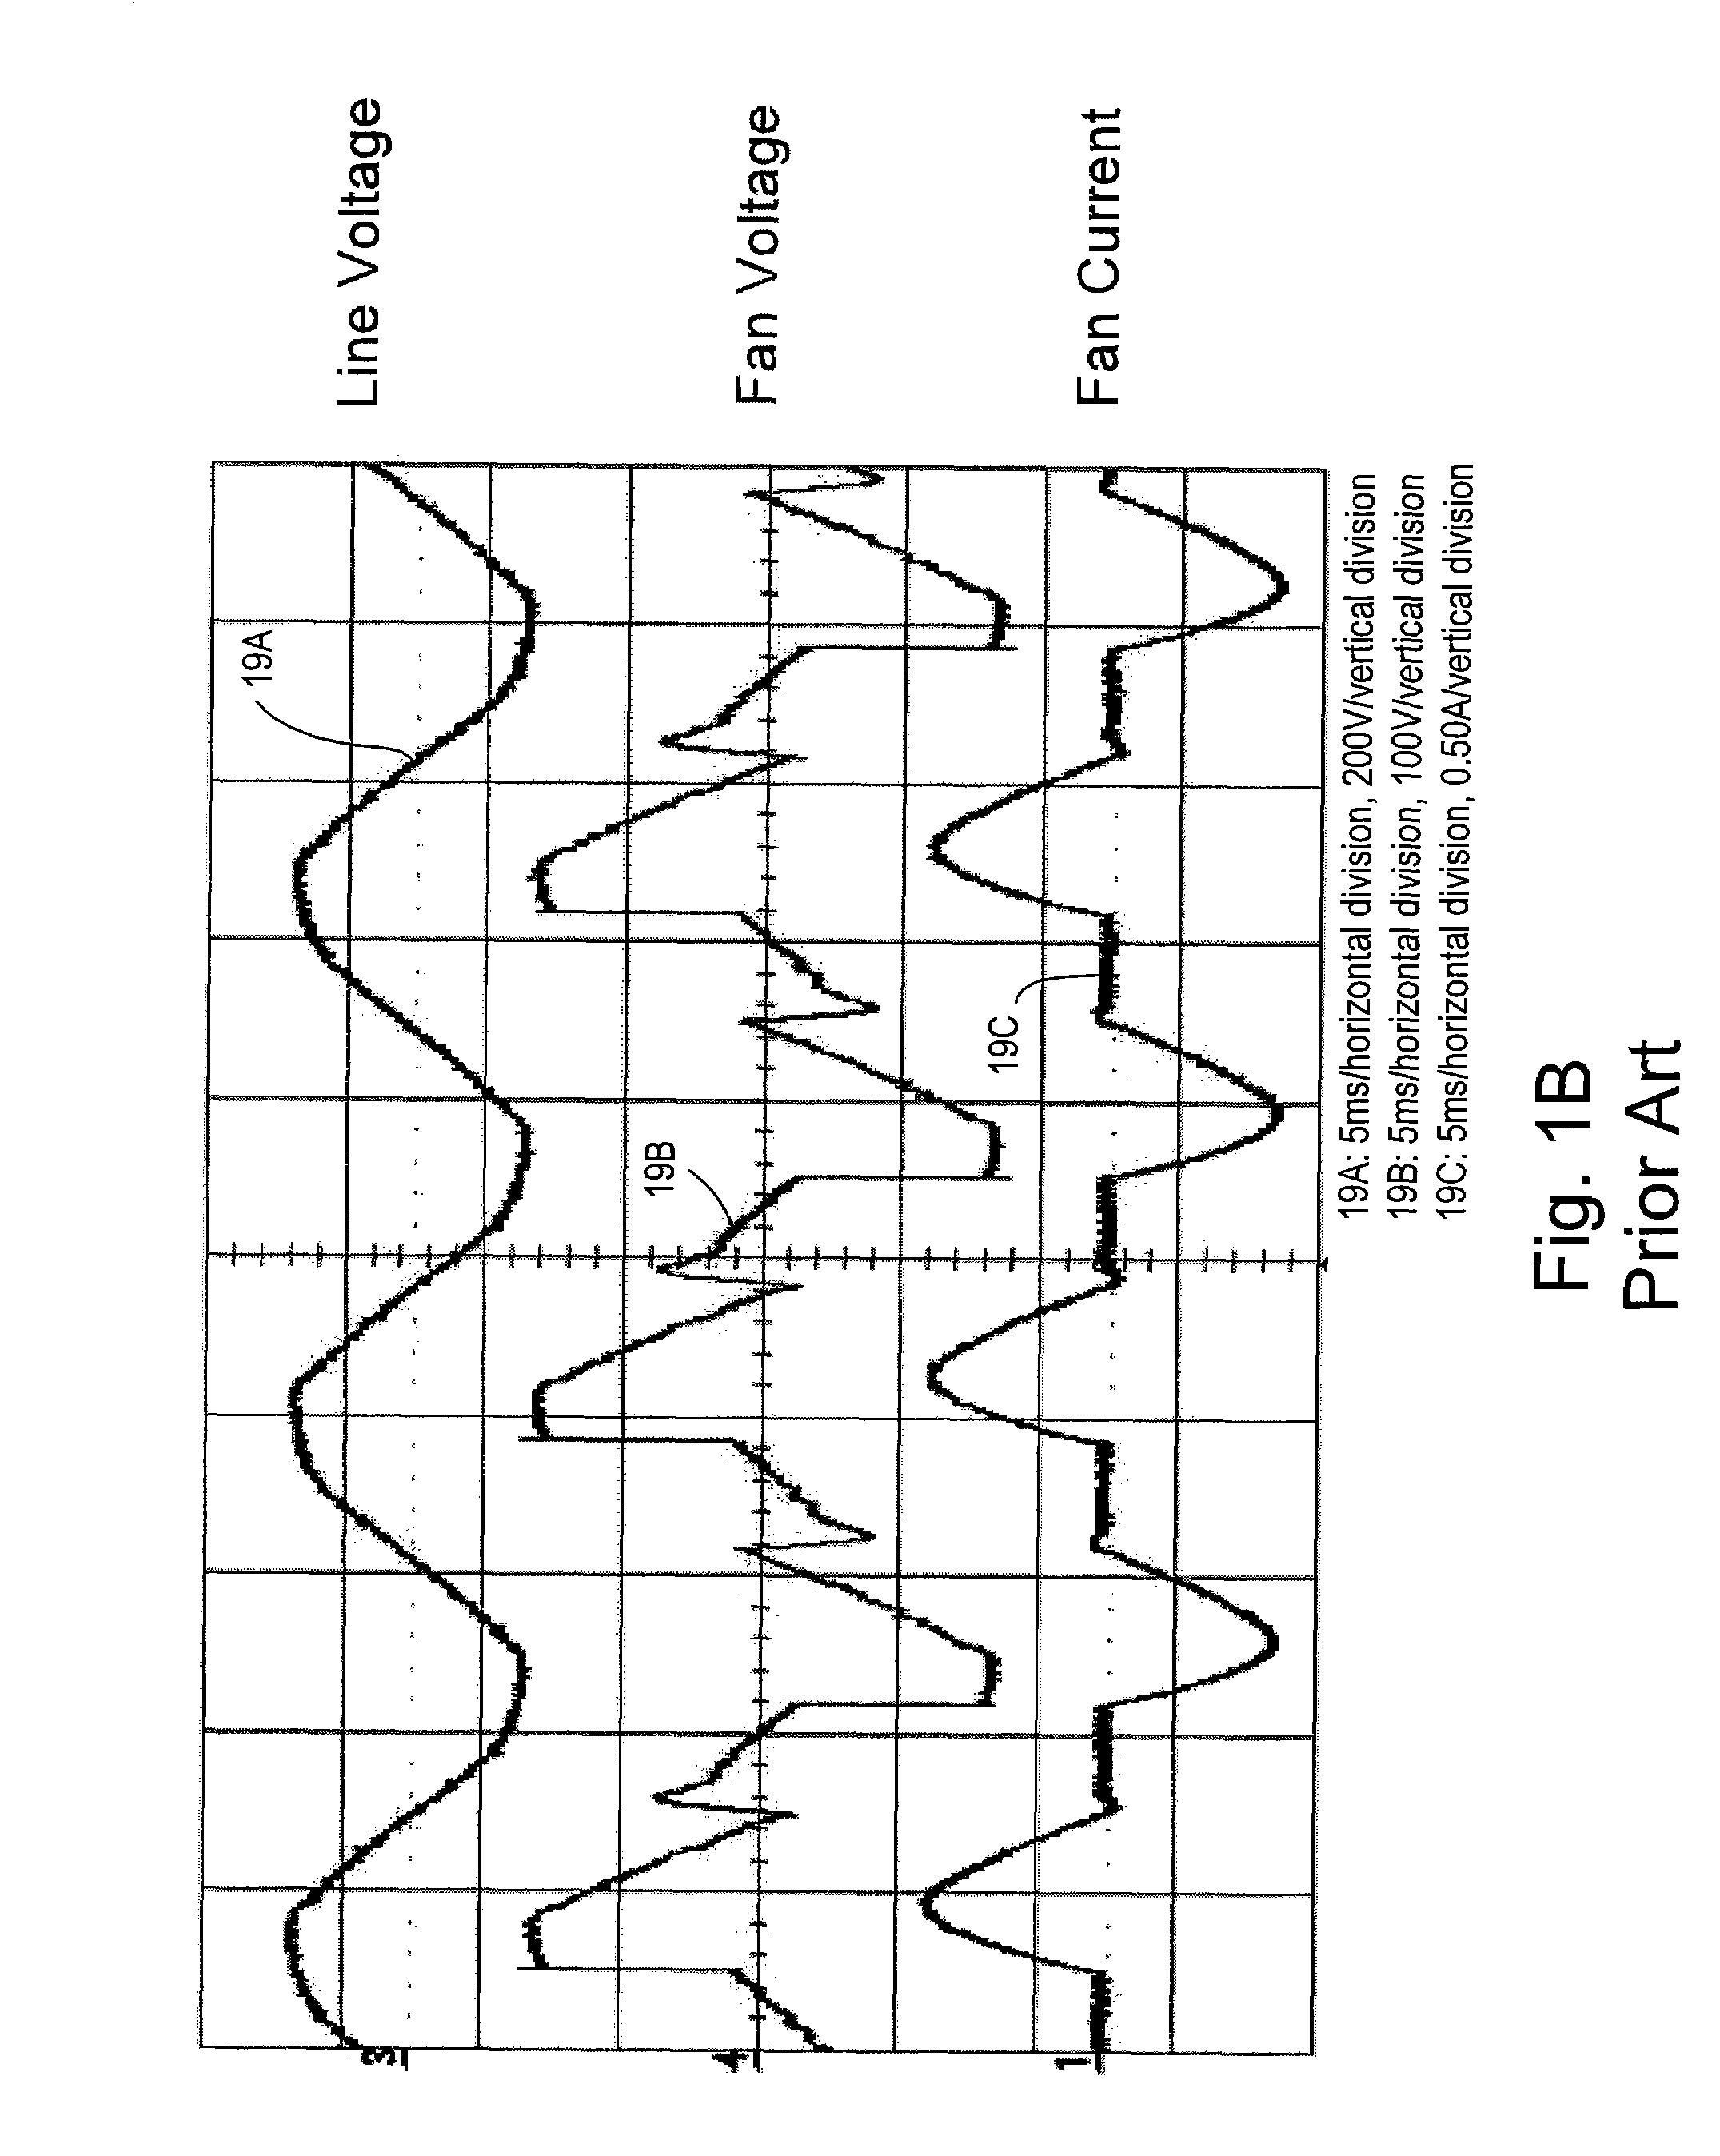 Method and apparatus for quiet fan speed control